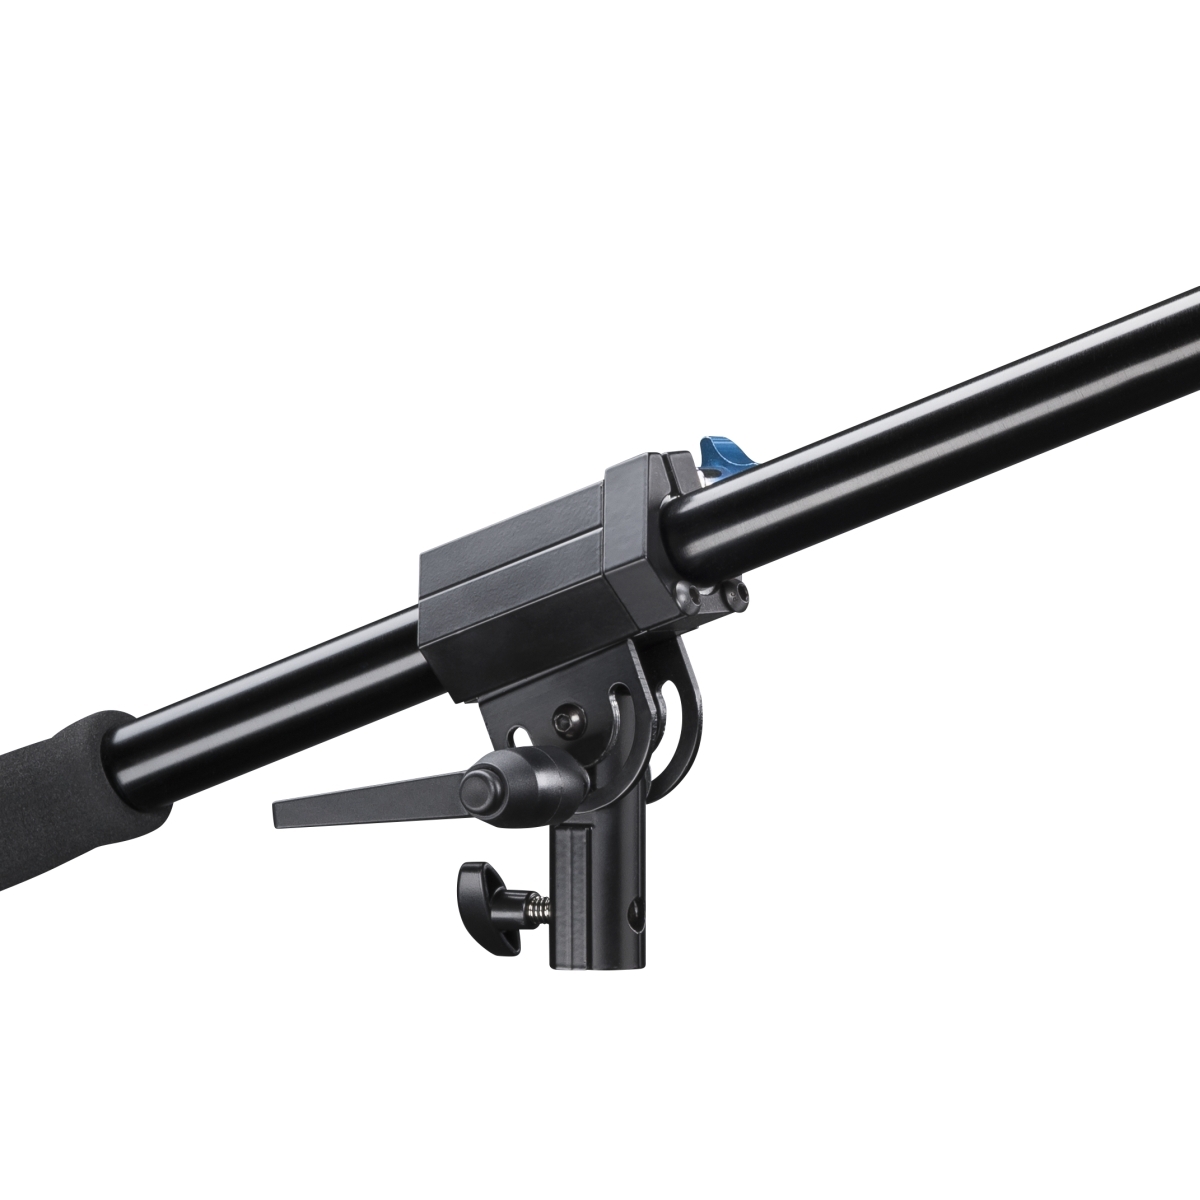 Walimex pro Boom incl. counter weight, 70-183cm